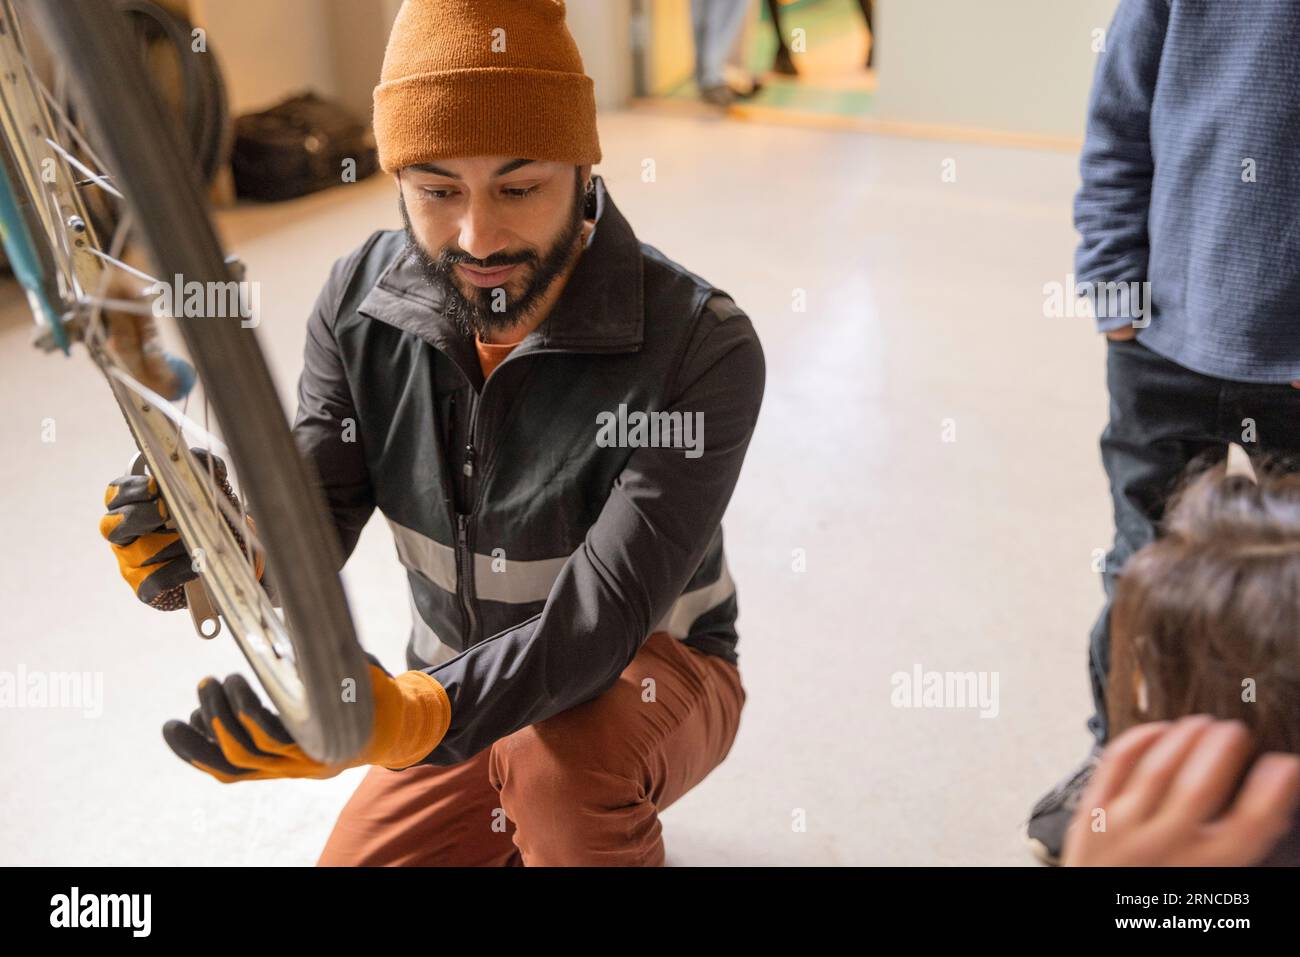 Male technician examining bicycle wheel at recycling center Stock Photo